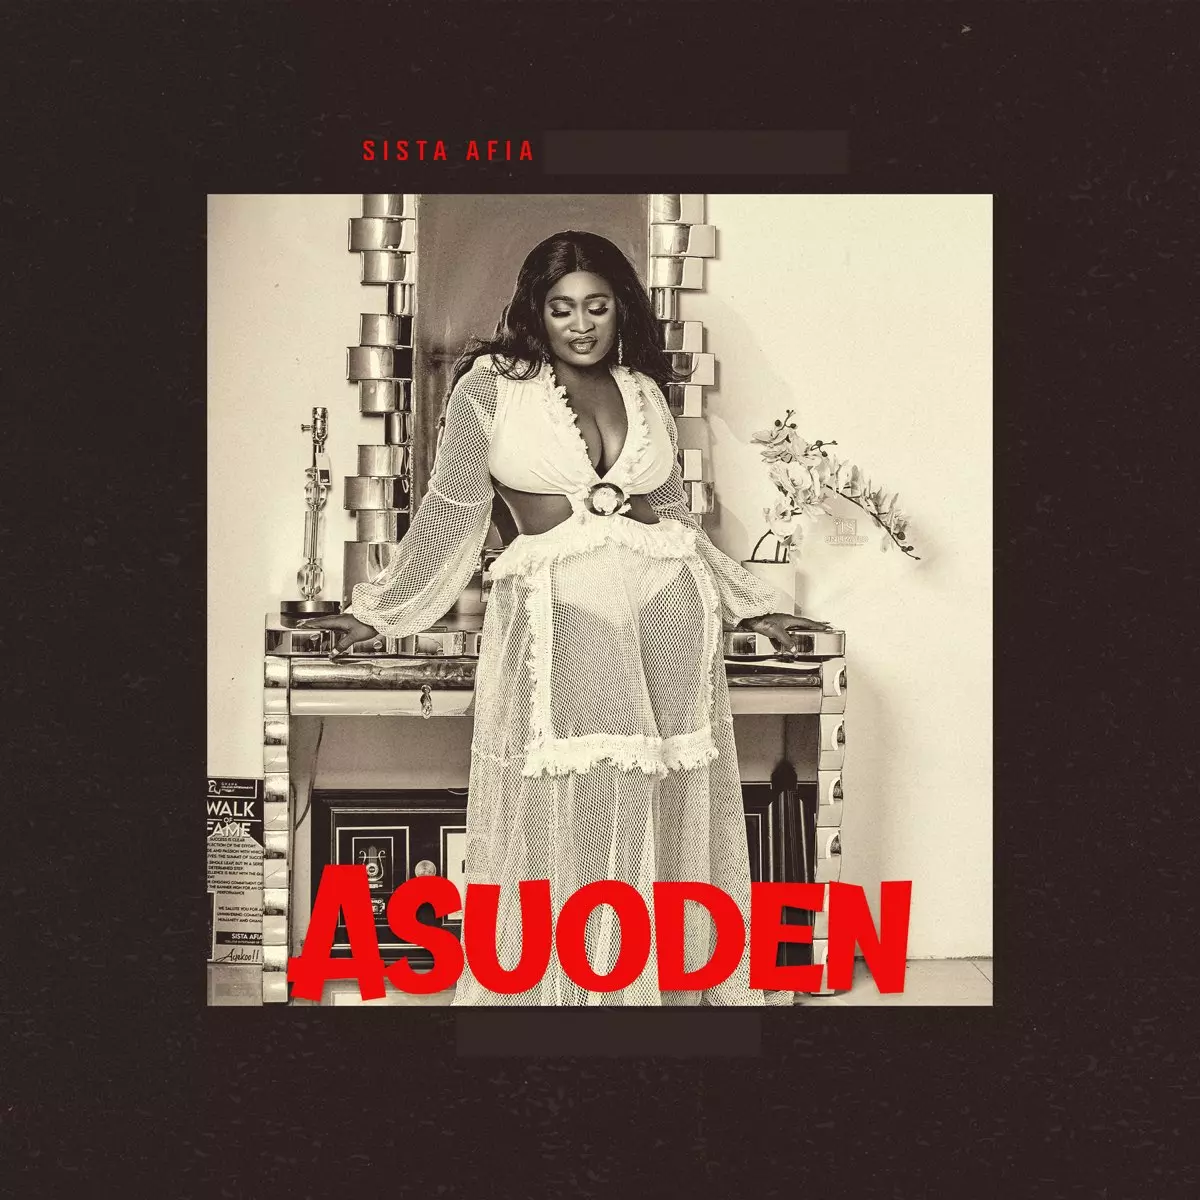 Asuoden (Acoustic) - Single by Sista Afia on Apple Music